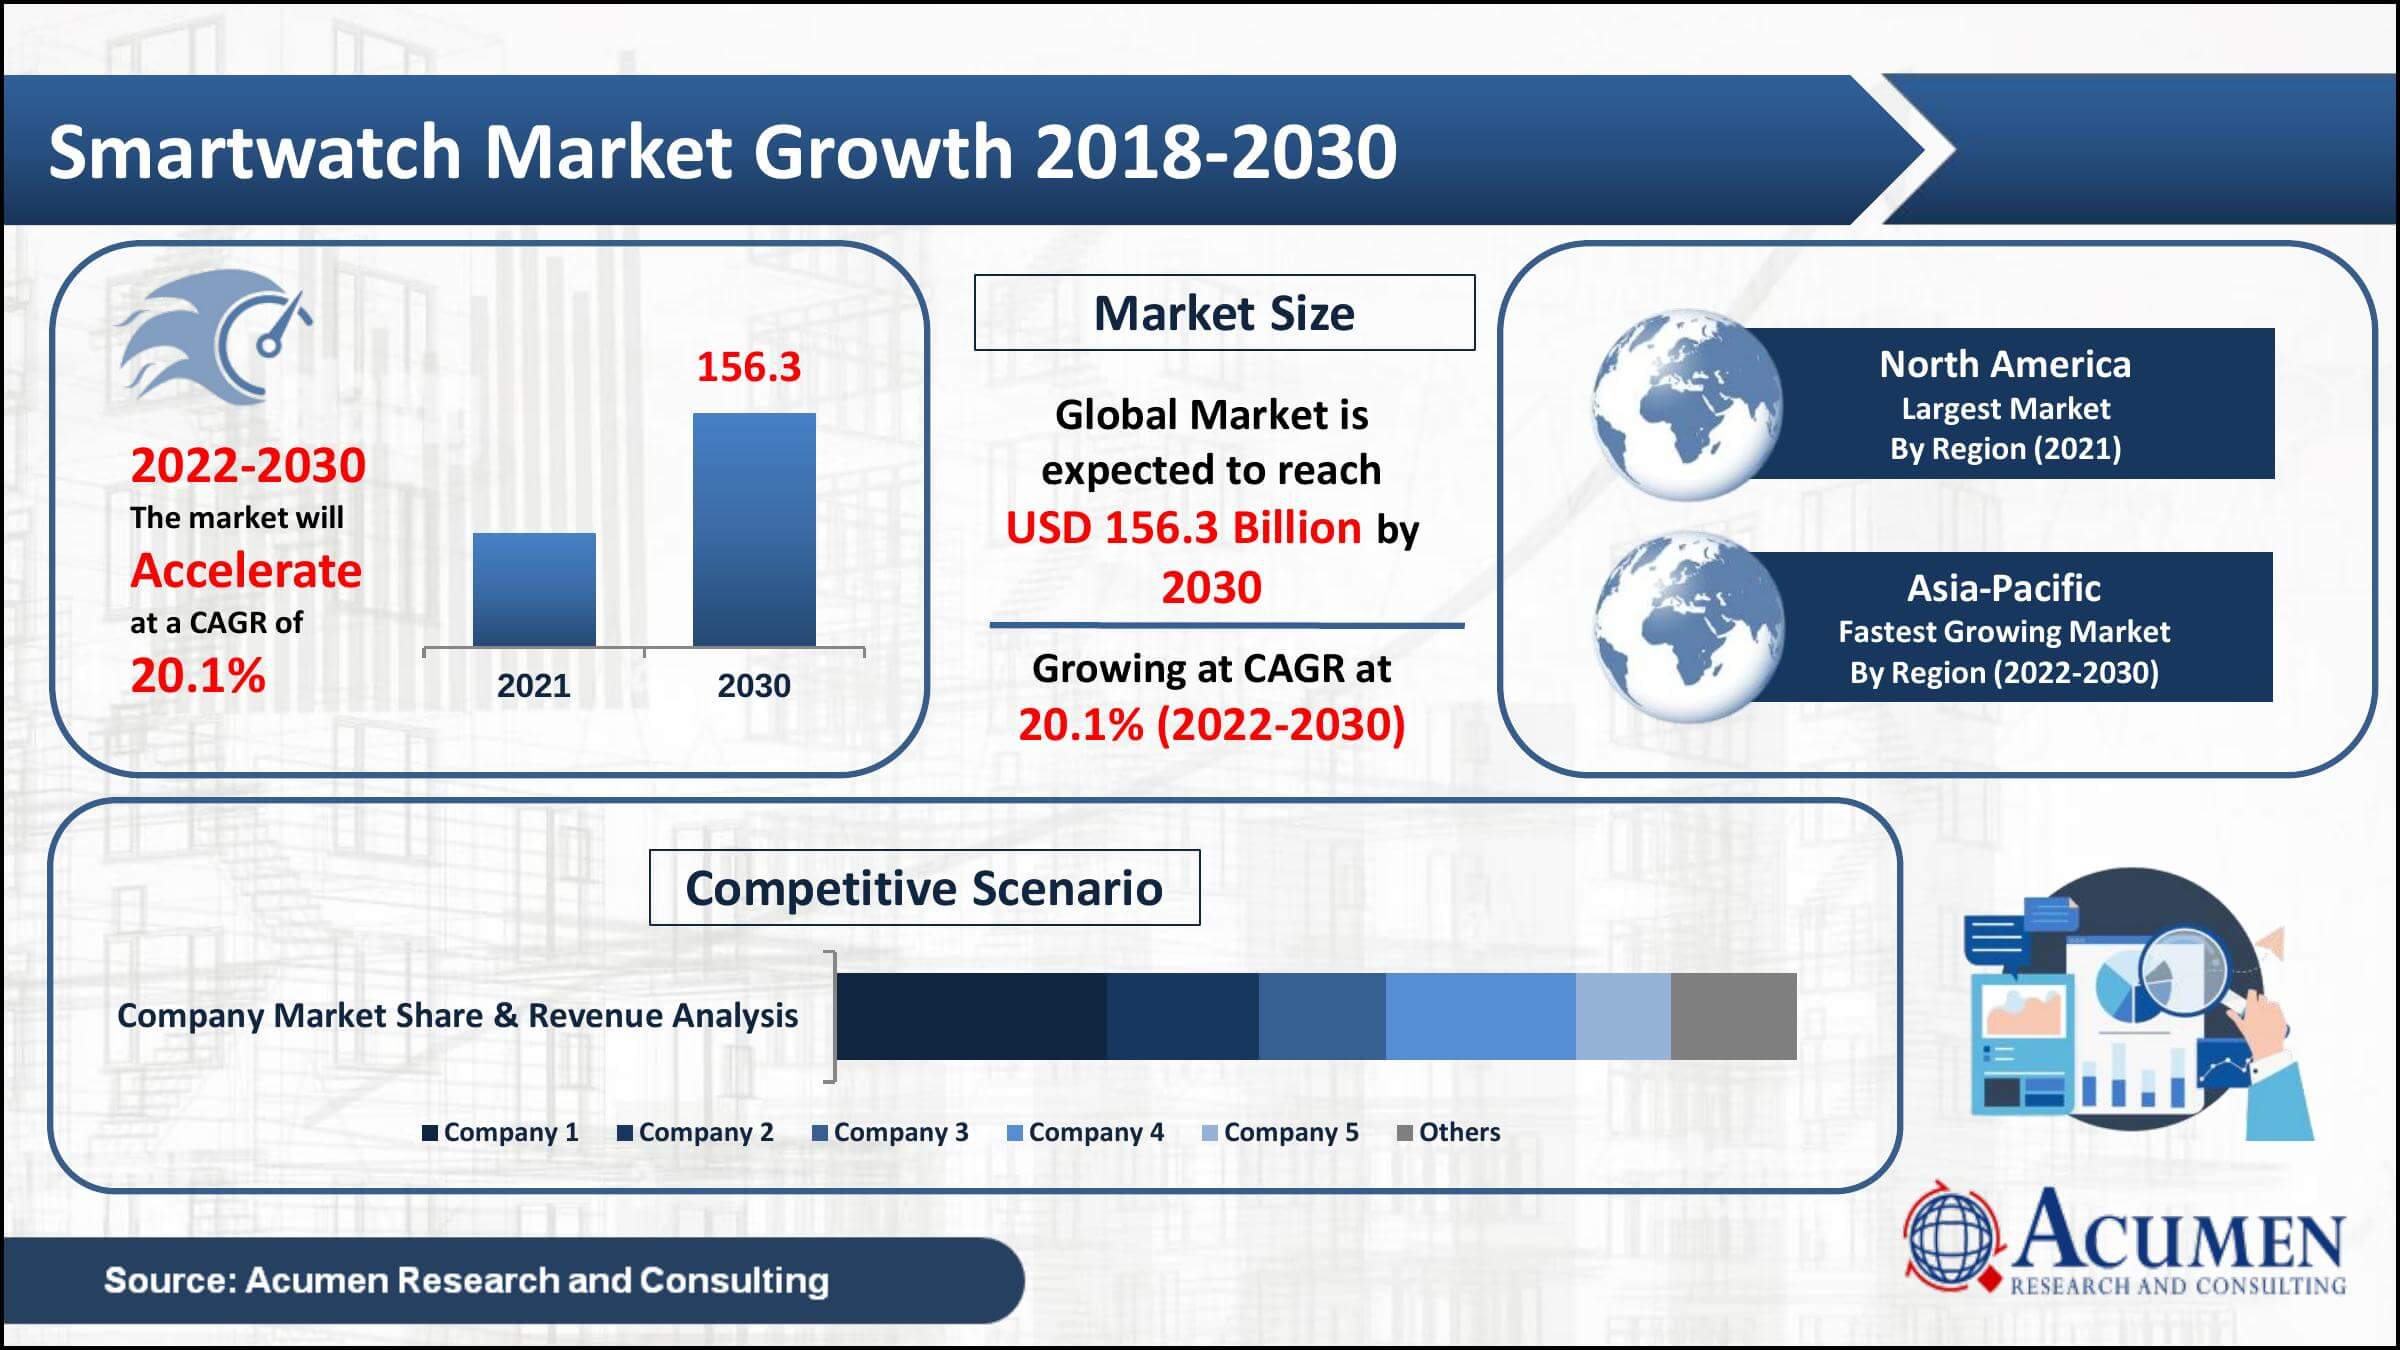 Smartwatch Market Size was USD 30.4 billion in 2021 and is expected to reach USD 156.3 Billion by 2030